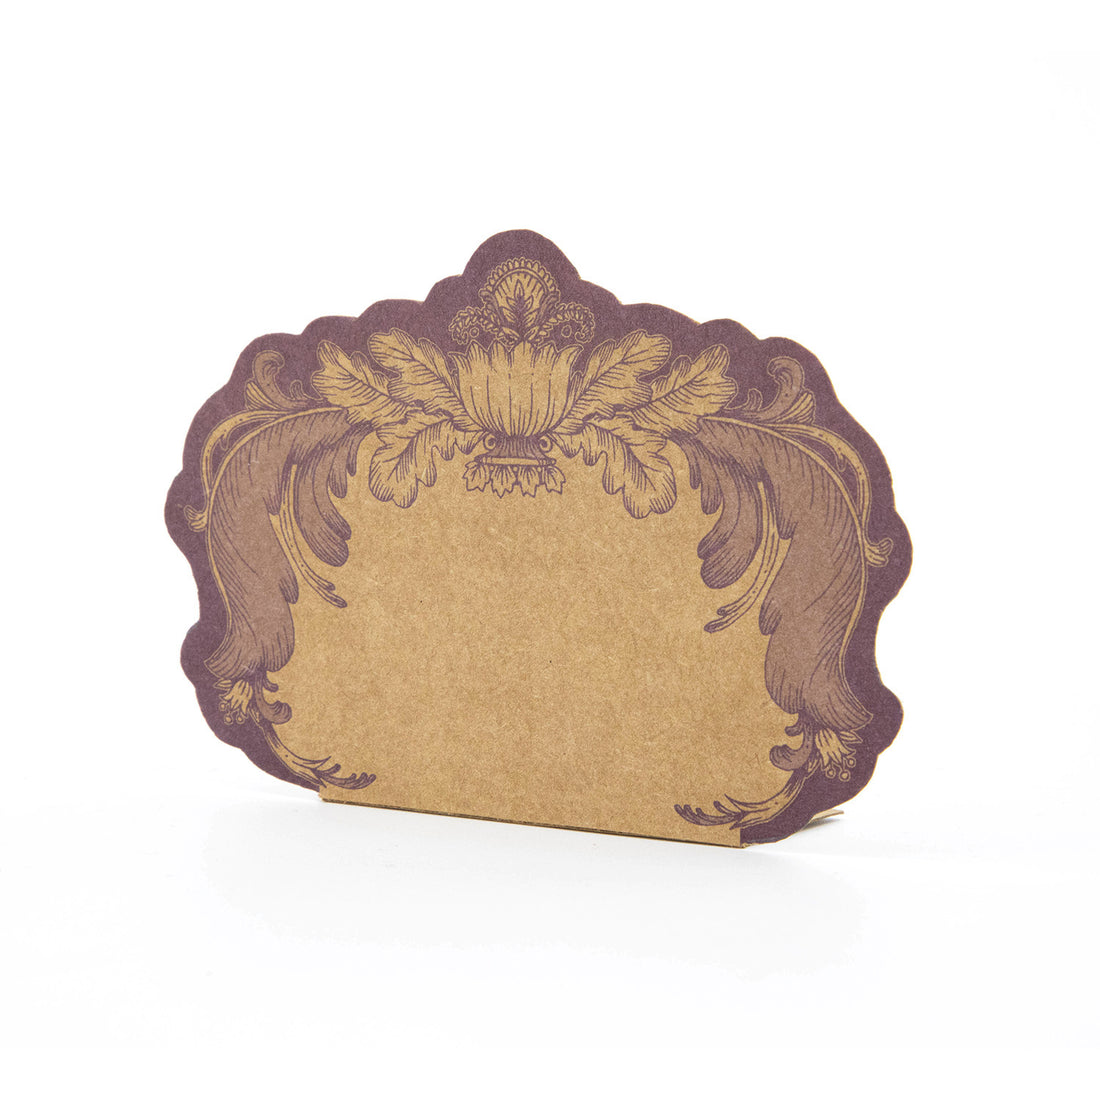 A kraft paper, freestanding place card with an ornate, French toile-style design in deep purple around the edges.